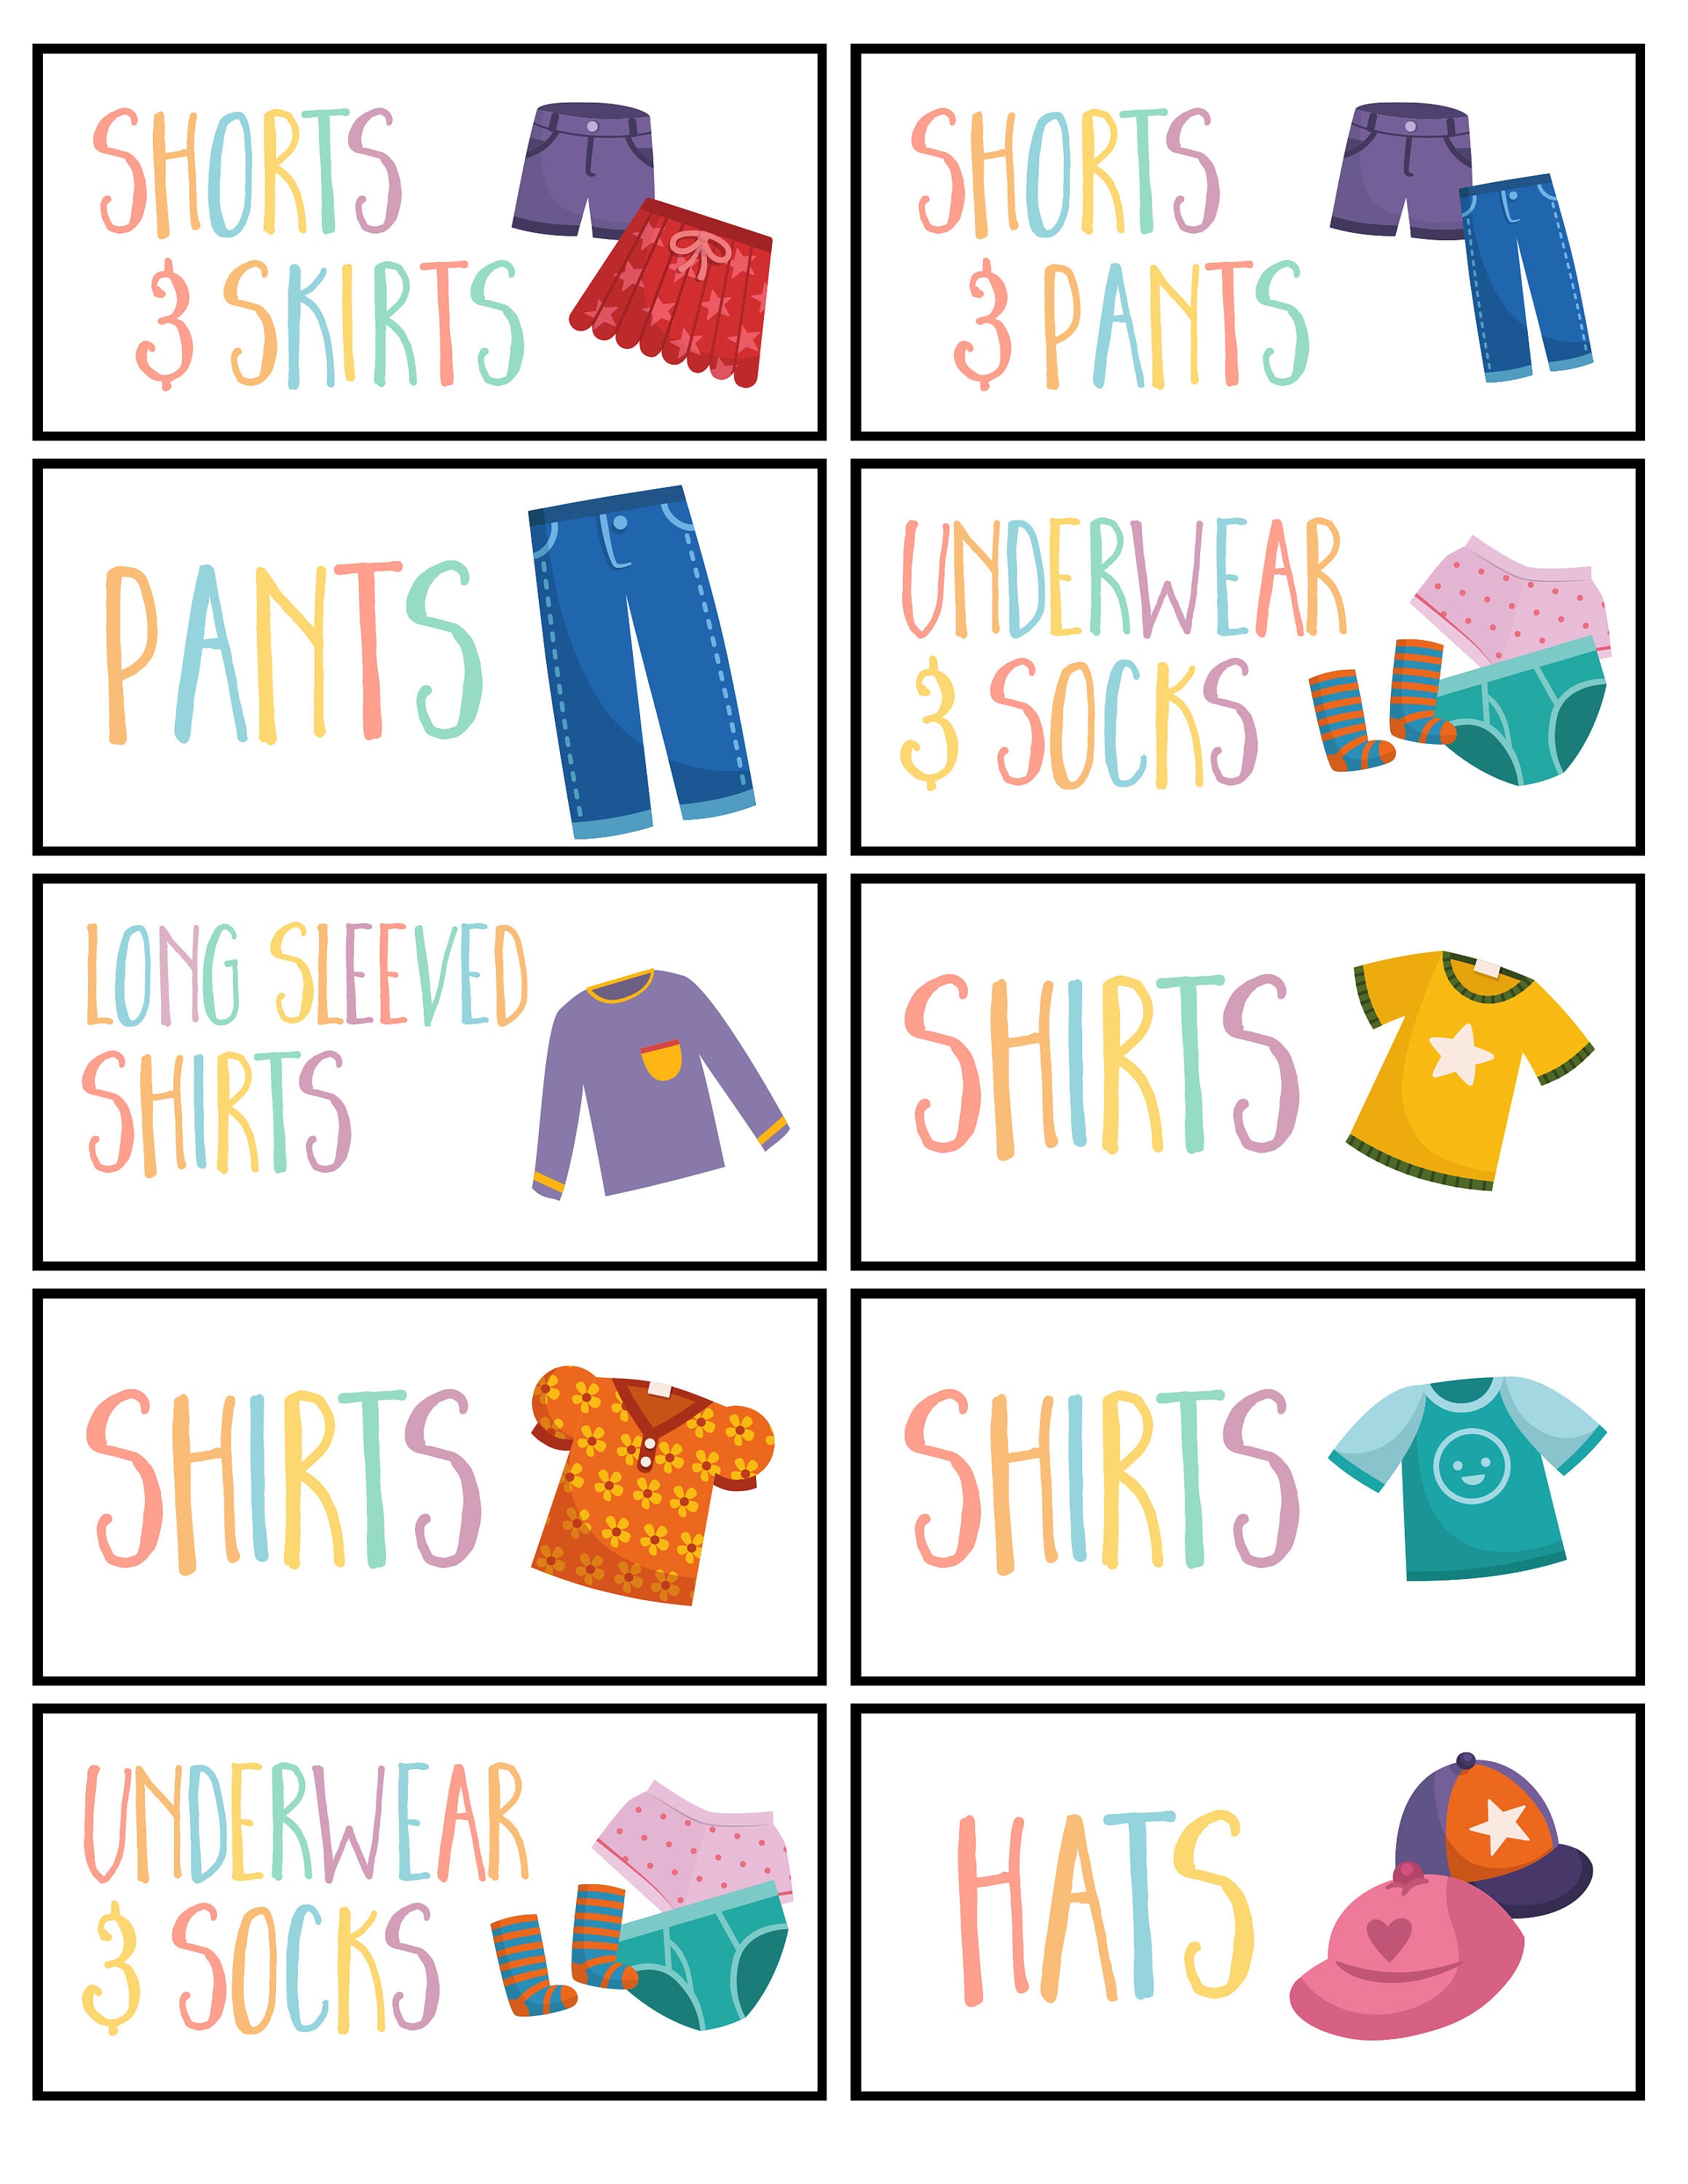 Kids Clothing Labels with illustrations for drawers – CoCreative Design